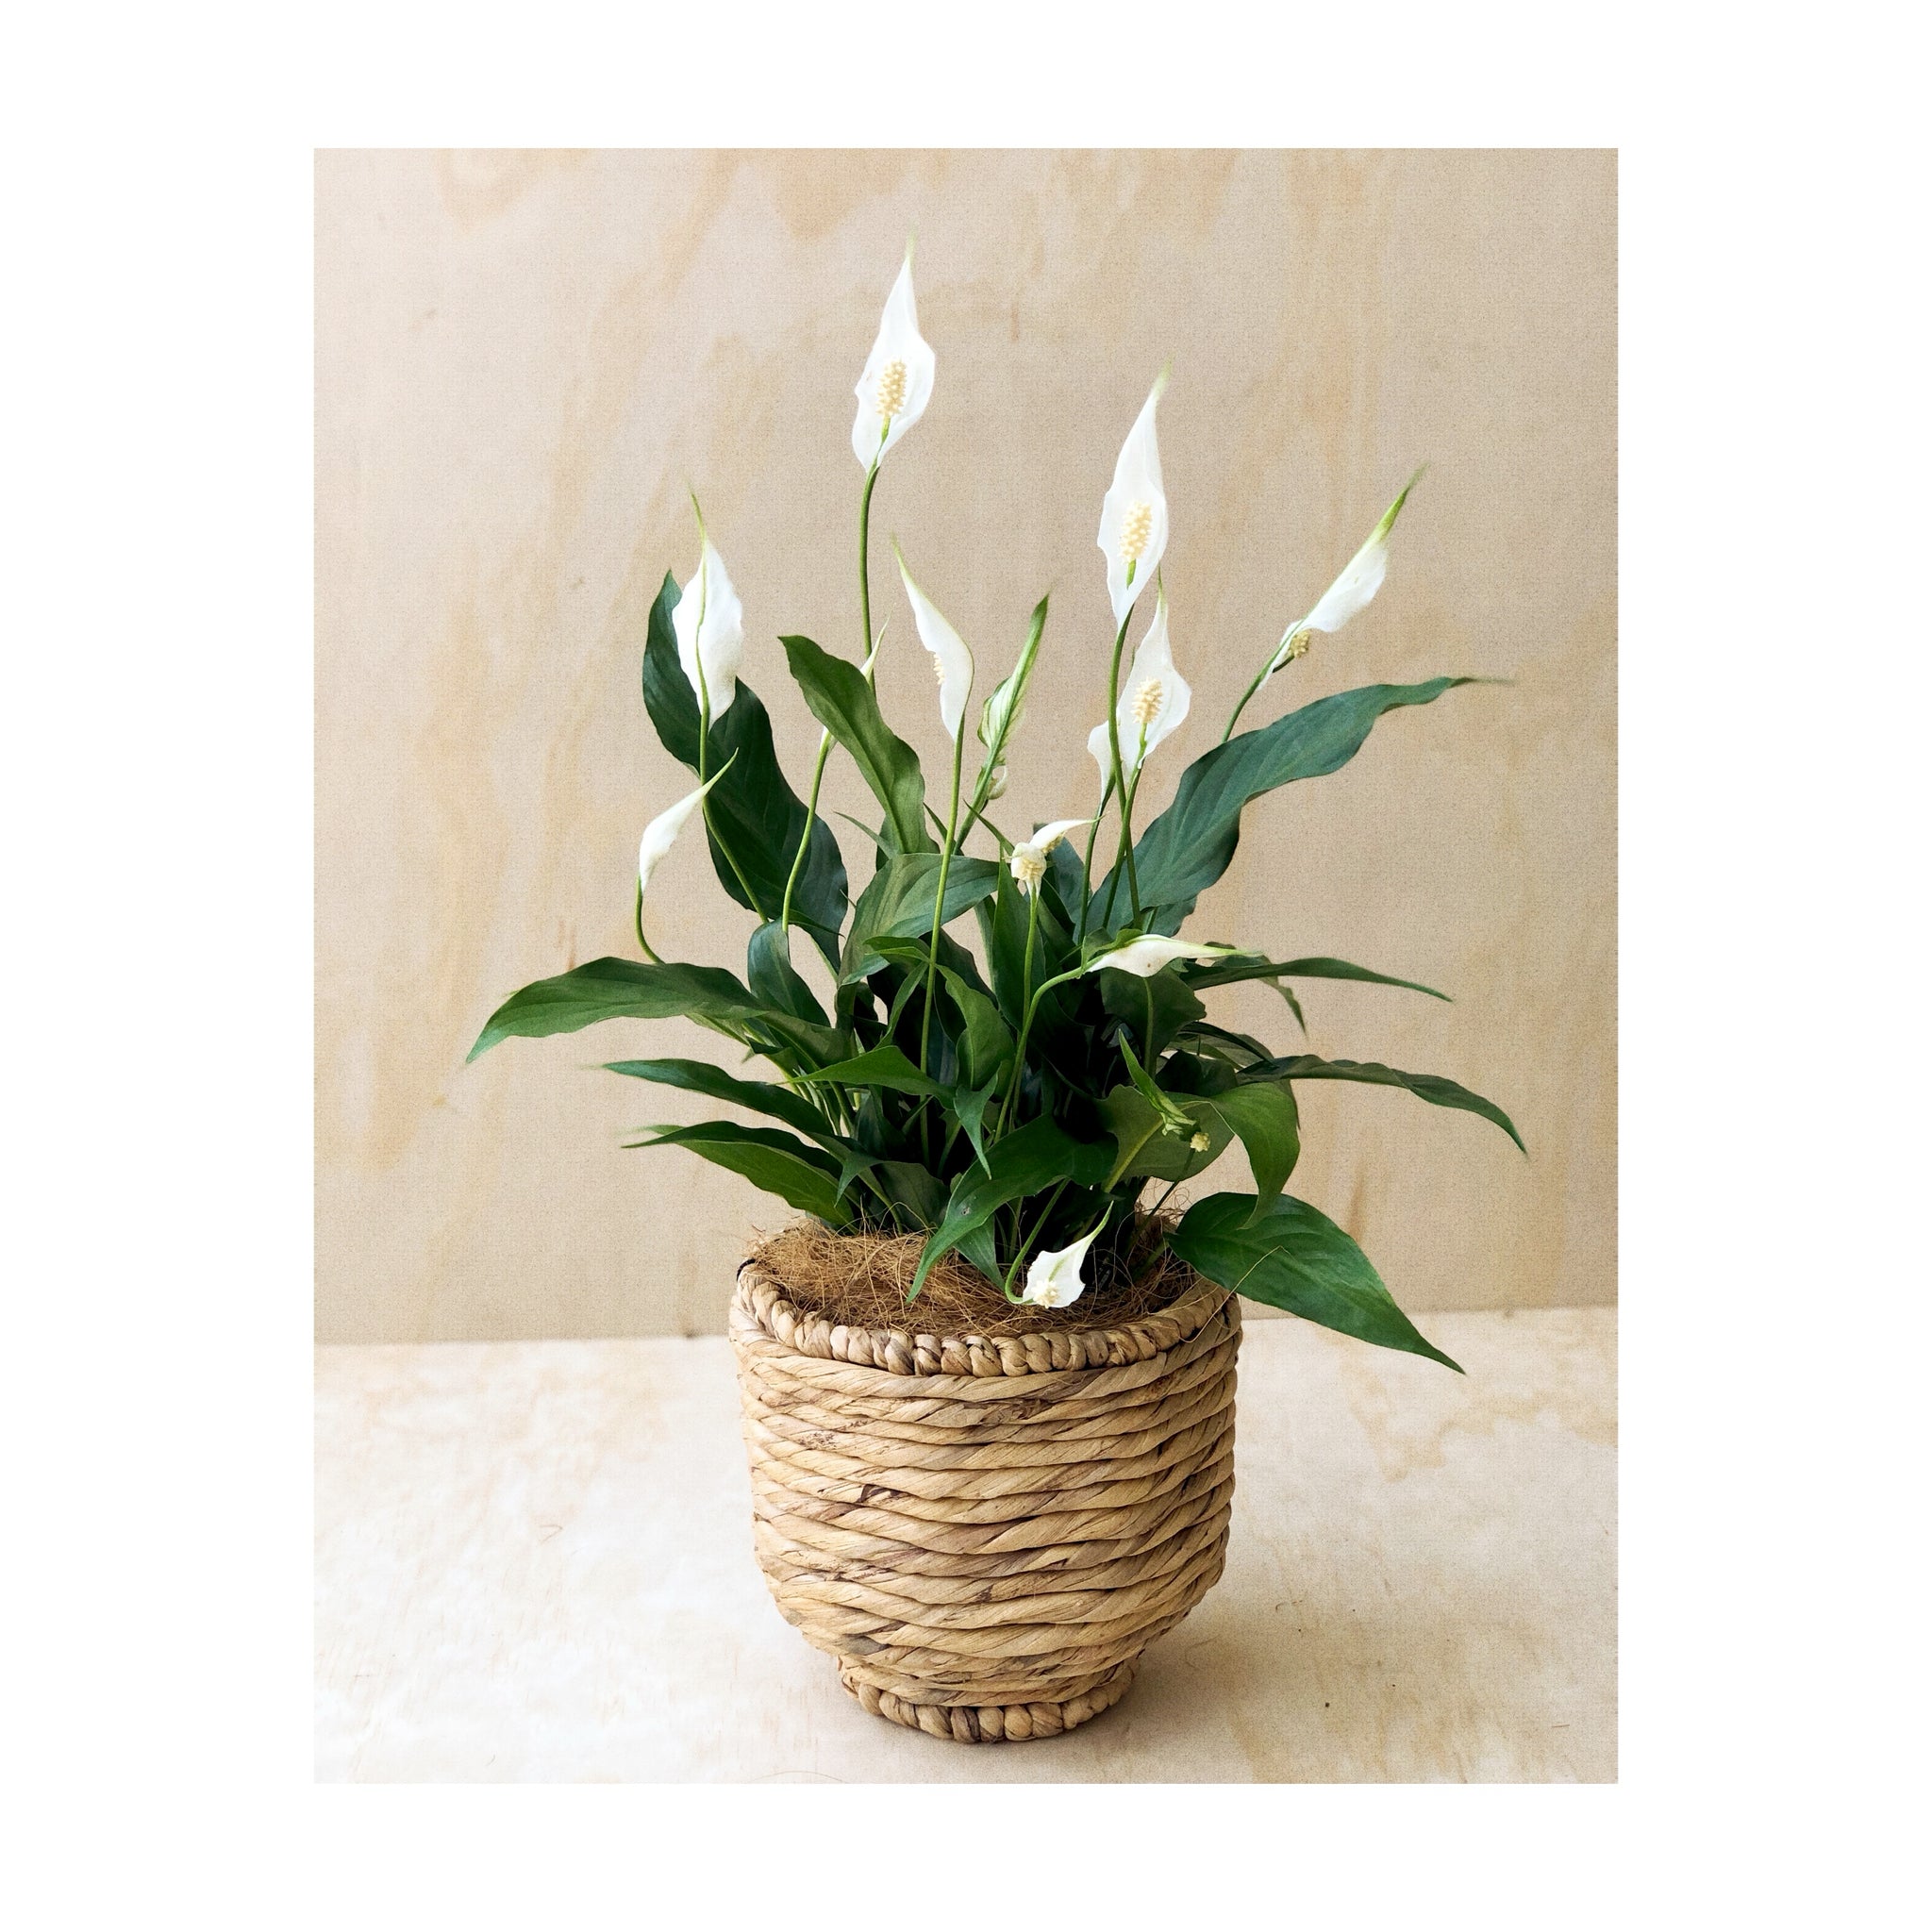 Peace Lily (Spathiphyllum) Sweet Rocco paired with the Nissa Hyacinth Basket